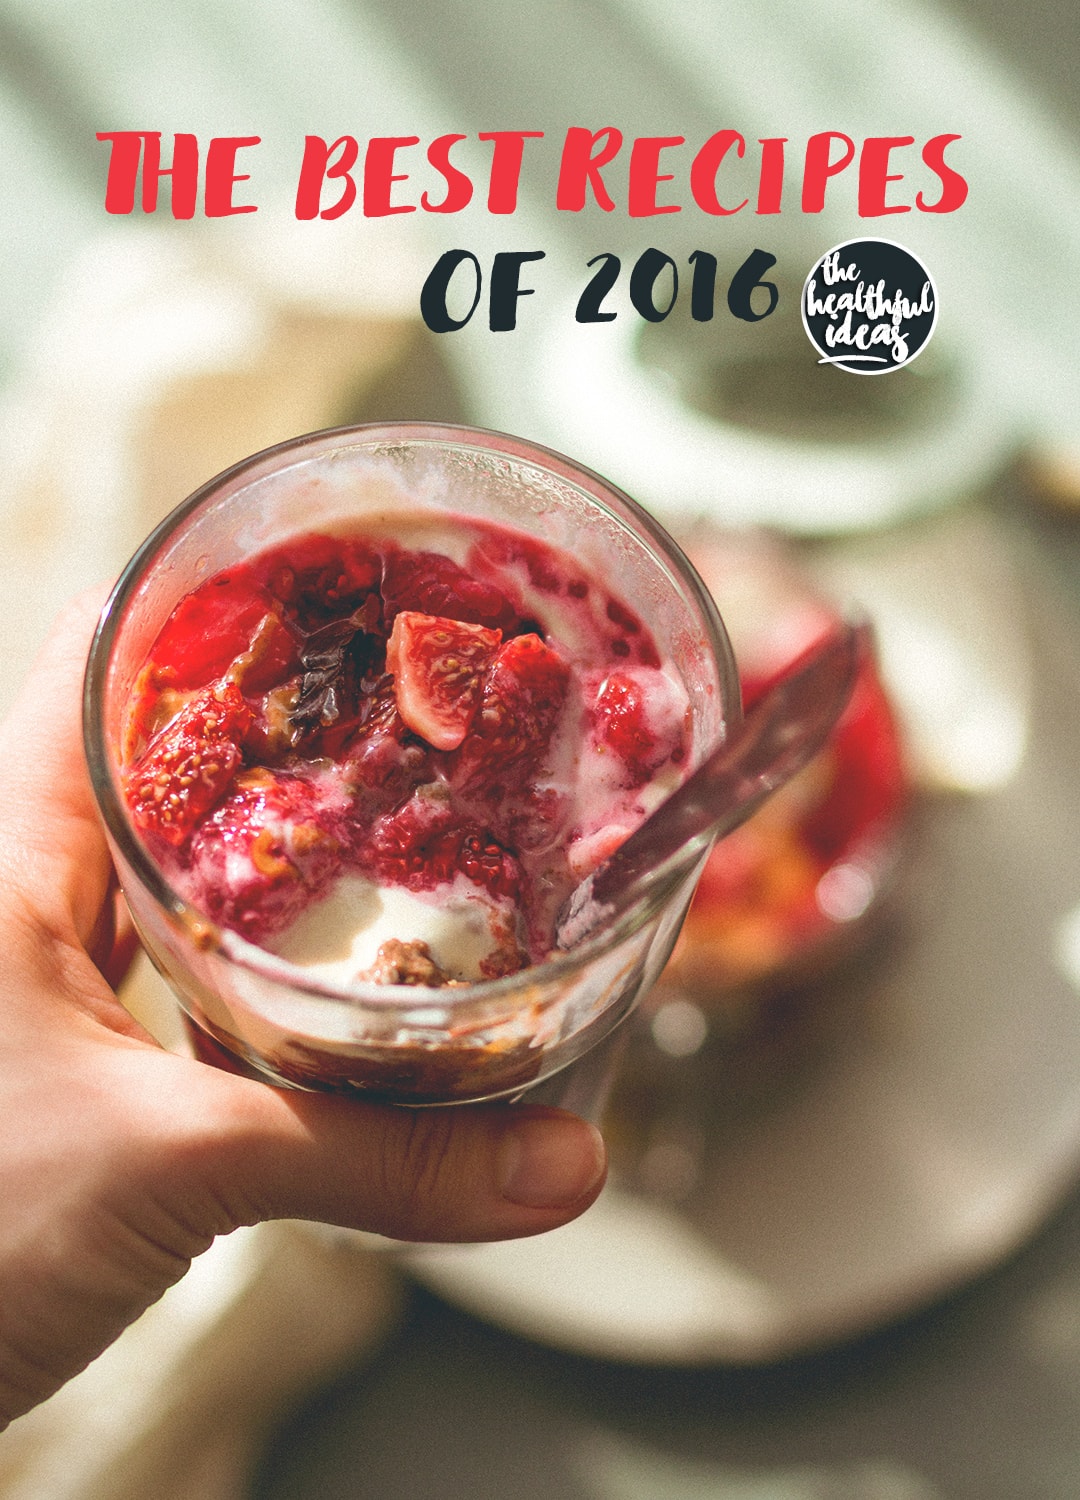 The Best Recipes of 2016 The Healthful Ideas - oatmeal, pancakes, hot chocolate, snacks, sweets, salads, pasta, spread, nut butter, almond milk, and more! You'll love everything! | thehealthfulideas.com